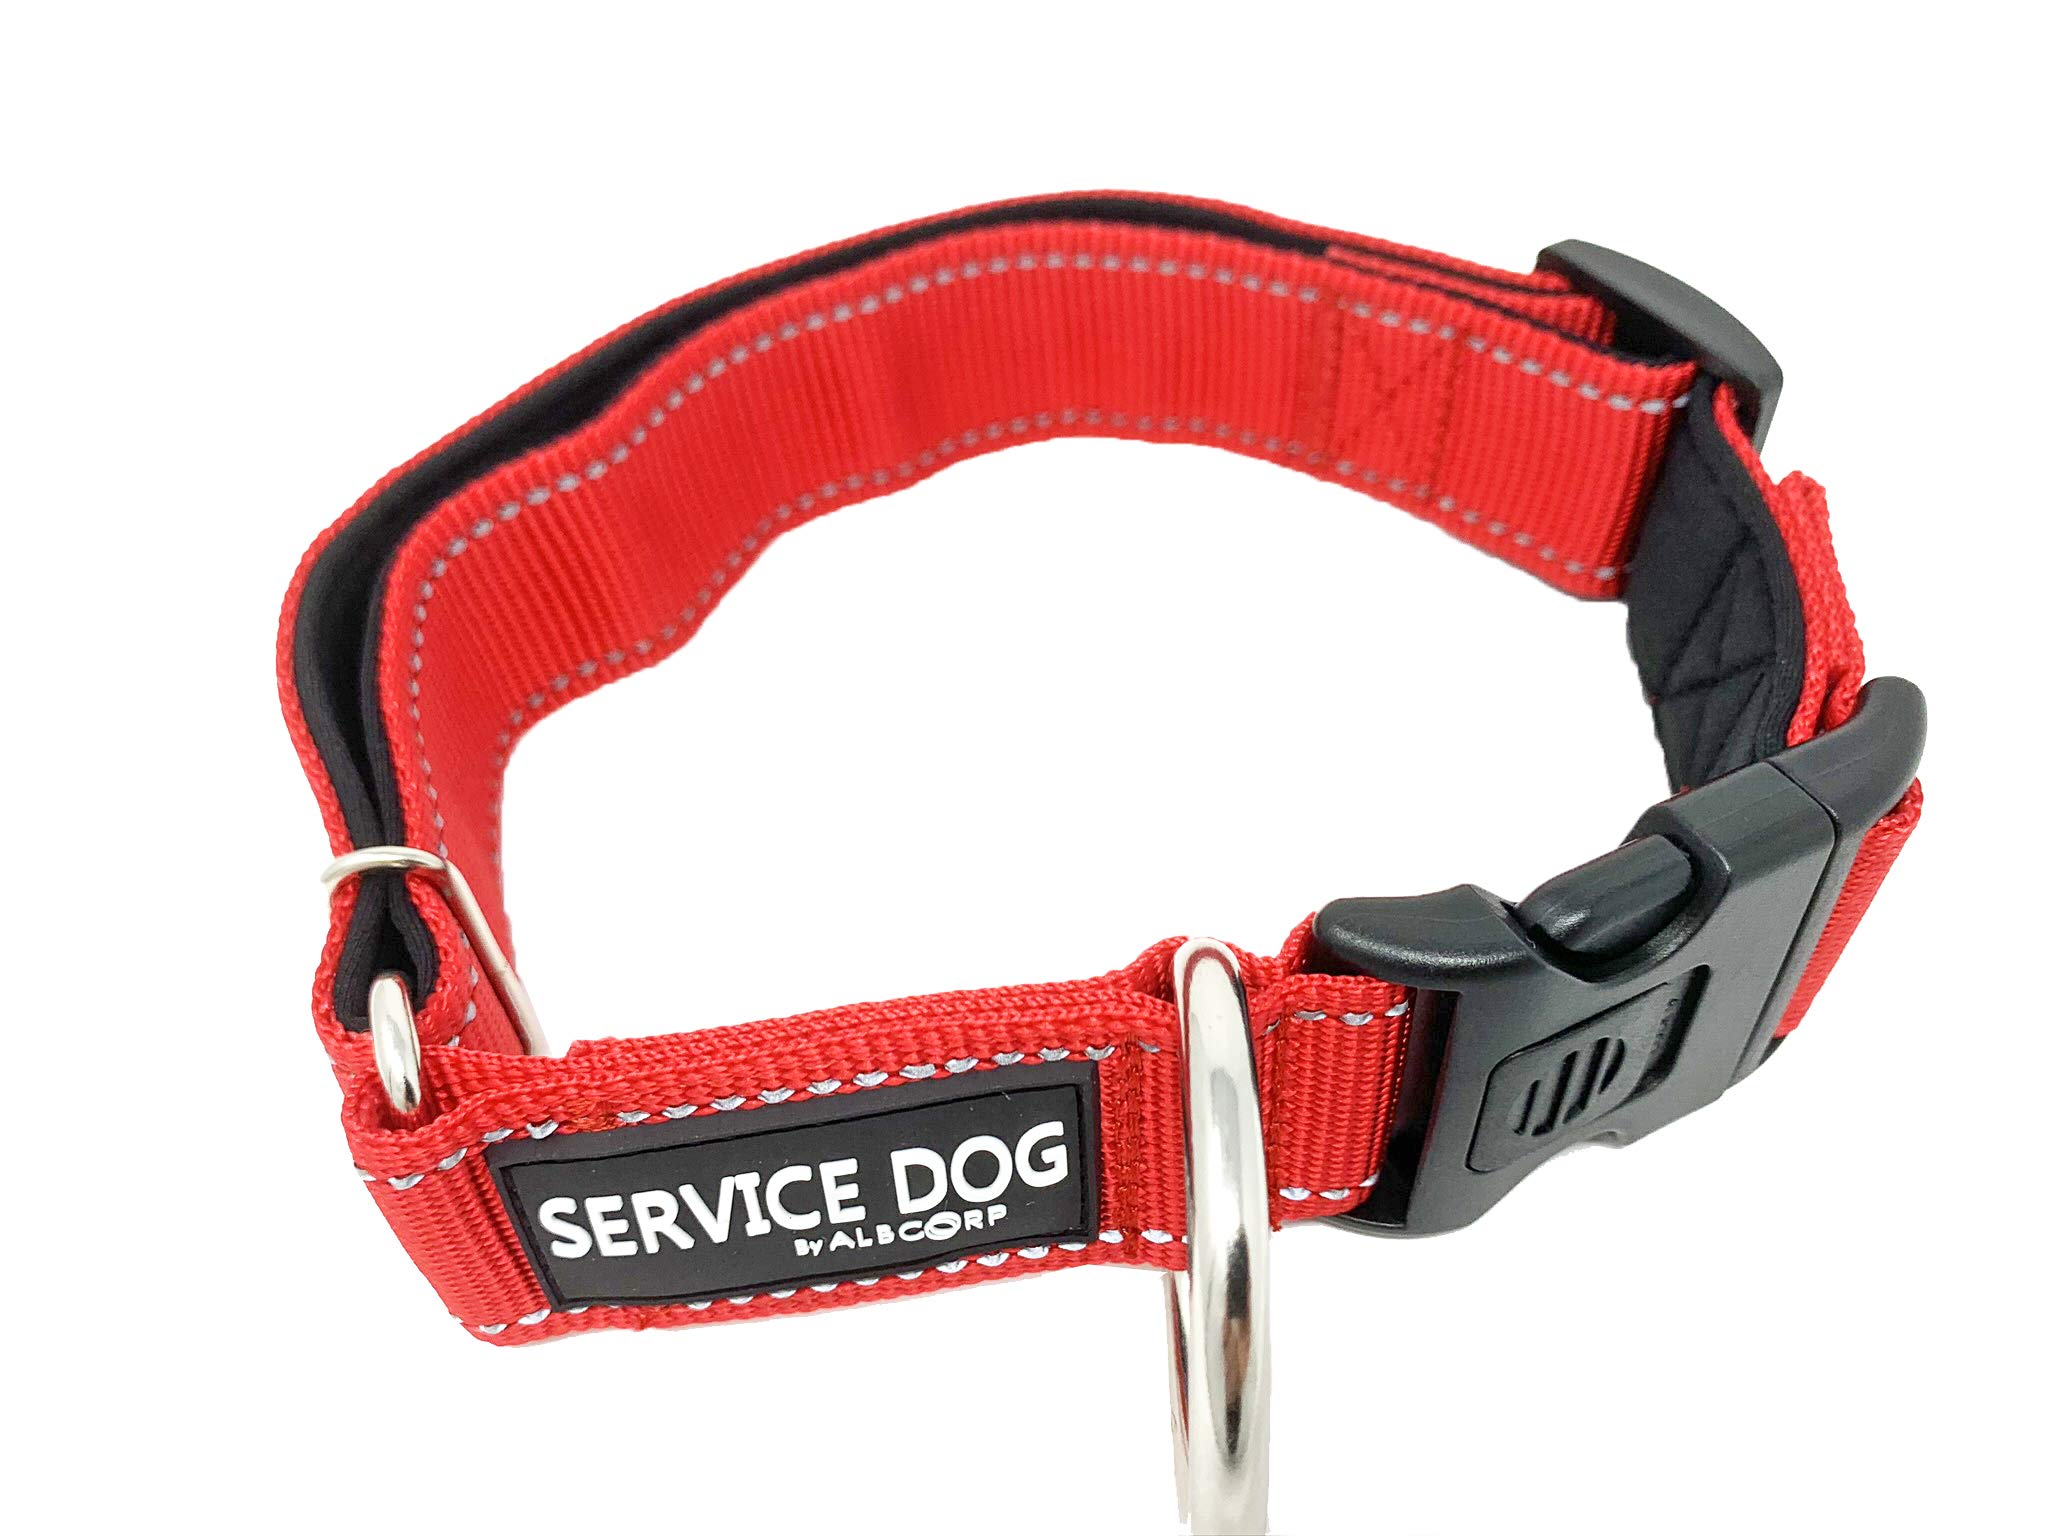 Albcorp Reflective Service Dog collar - Service Dog Rubber Patch - Durable D-Ring for Service Animal Leashes or ID Tags, XL, Red